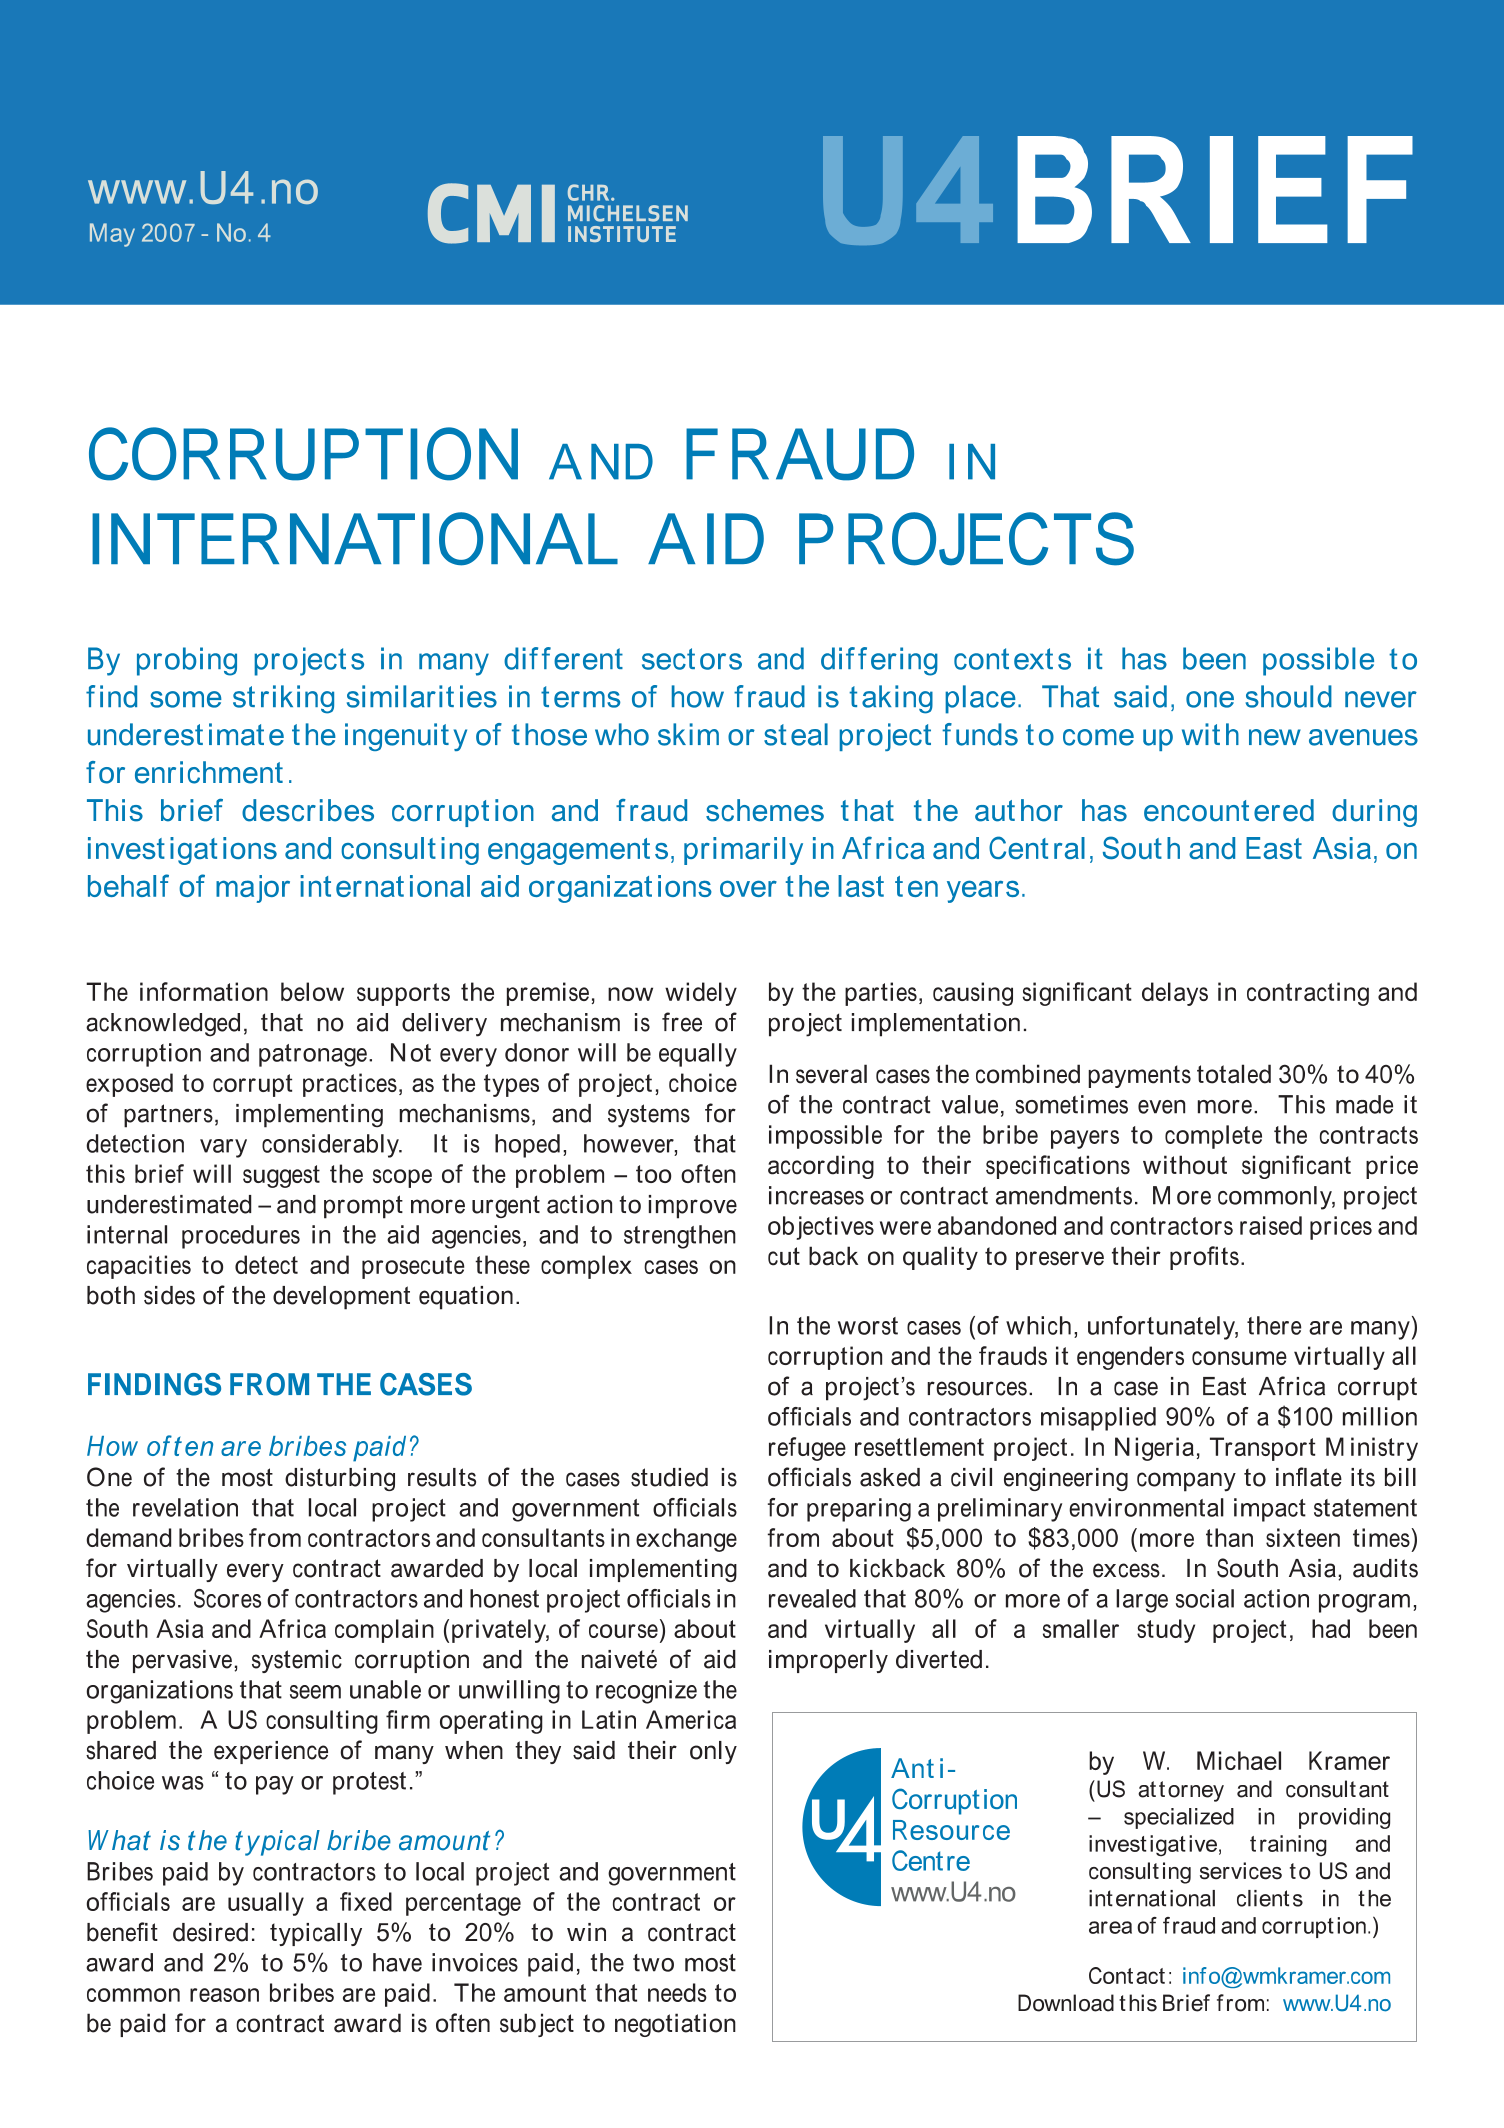 Corruption and fraud in international aid projects